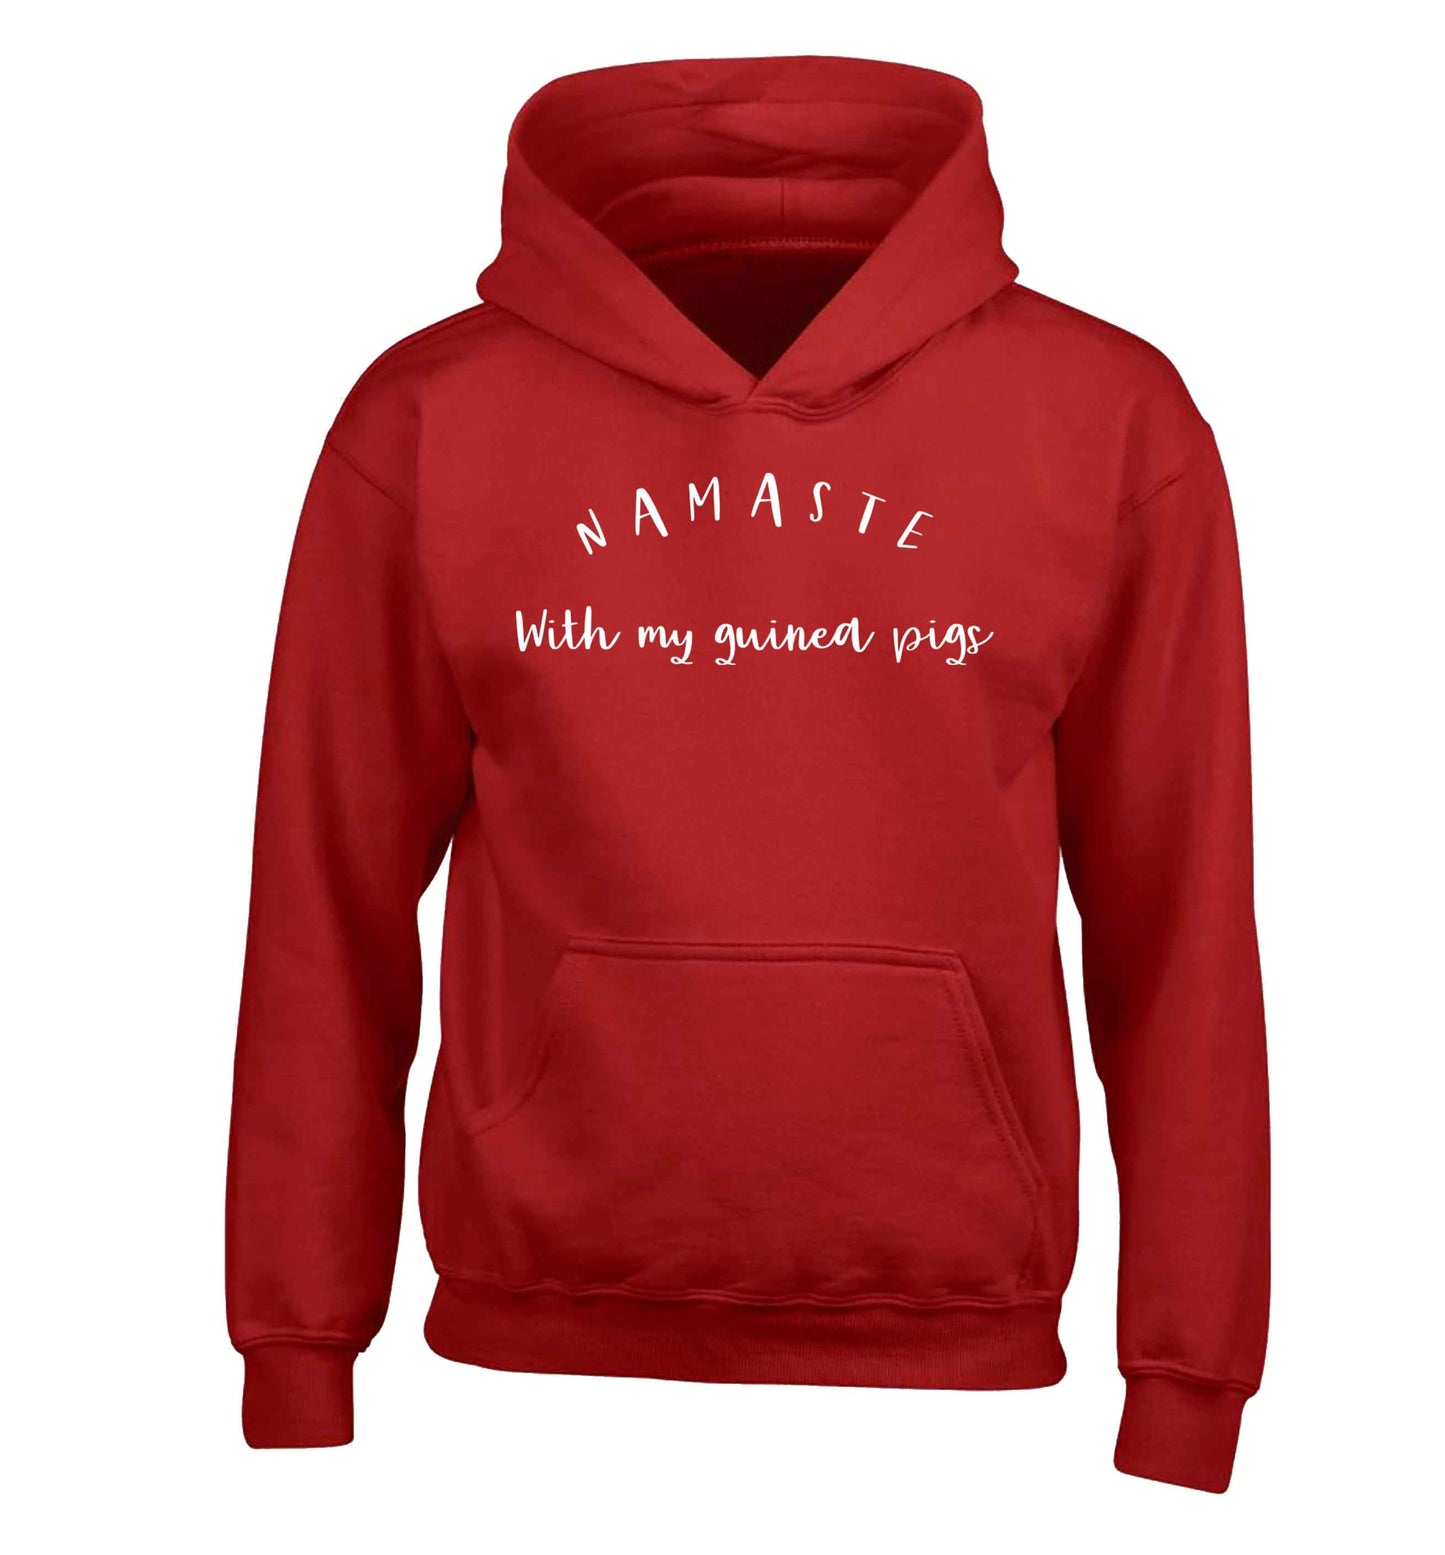 Namaste with my guinea pigs children's red hoodie 12-13 Years